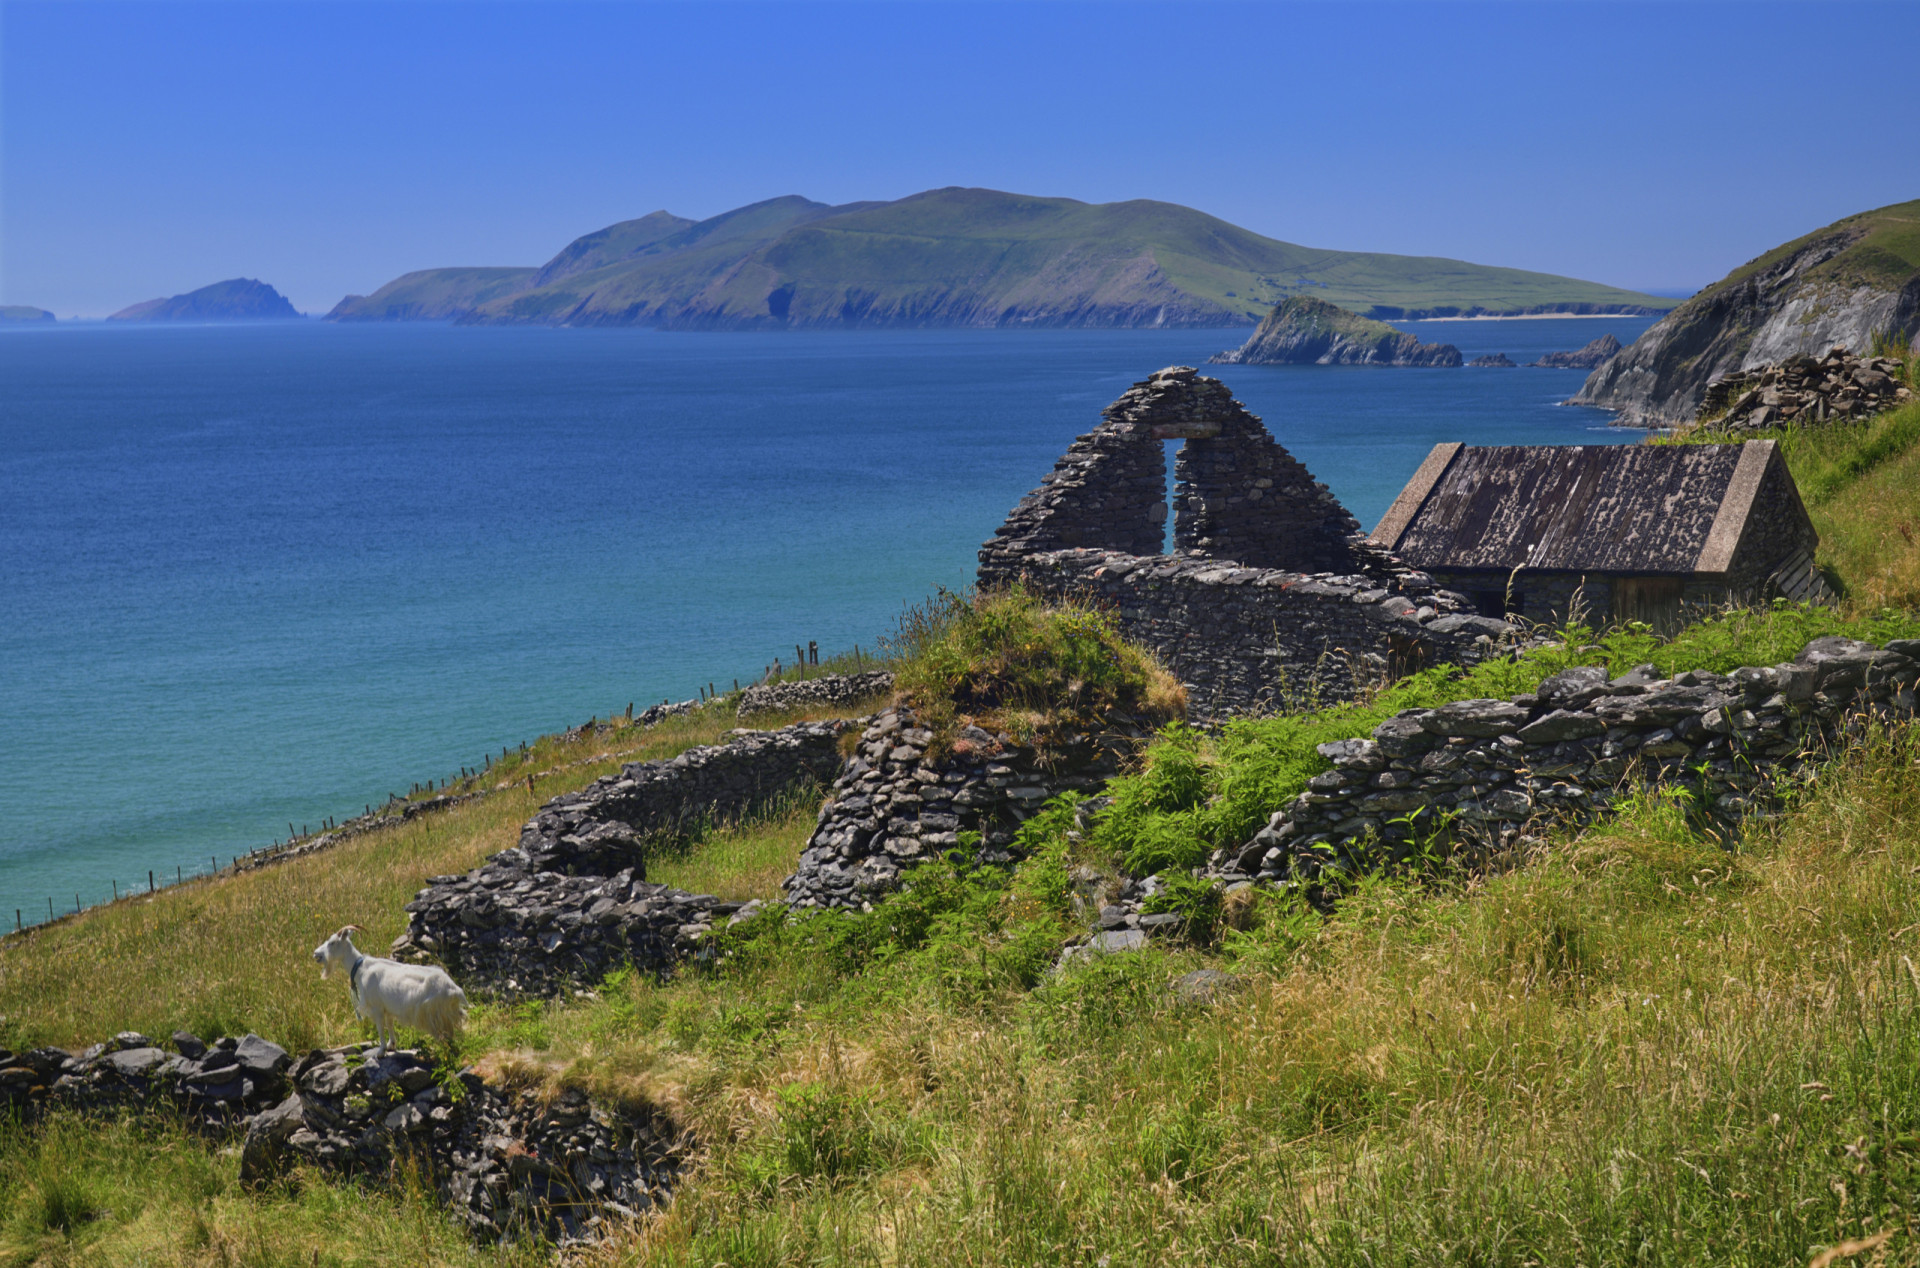 <p>An Area of Special Conservation, the islands are home to abundant wildlife and fauna. Deserted since 1953, the Irish-speaking former inhabitants produced much literature that provides a glimpse into the past and the history of the place.</p><p><a href="https://www.msn.com/en-au/community/channel/vid-7xx8mnucu55yw63we9va2gwr7uihbxwc68fxqp25x6tg4ftibpra?cvid=94631541bc0f4f89bfd59158d696ad7e">Follow us and access great exclusive content every day</a></p>